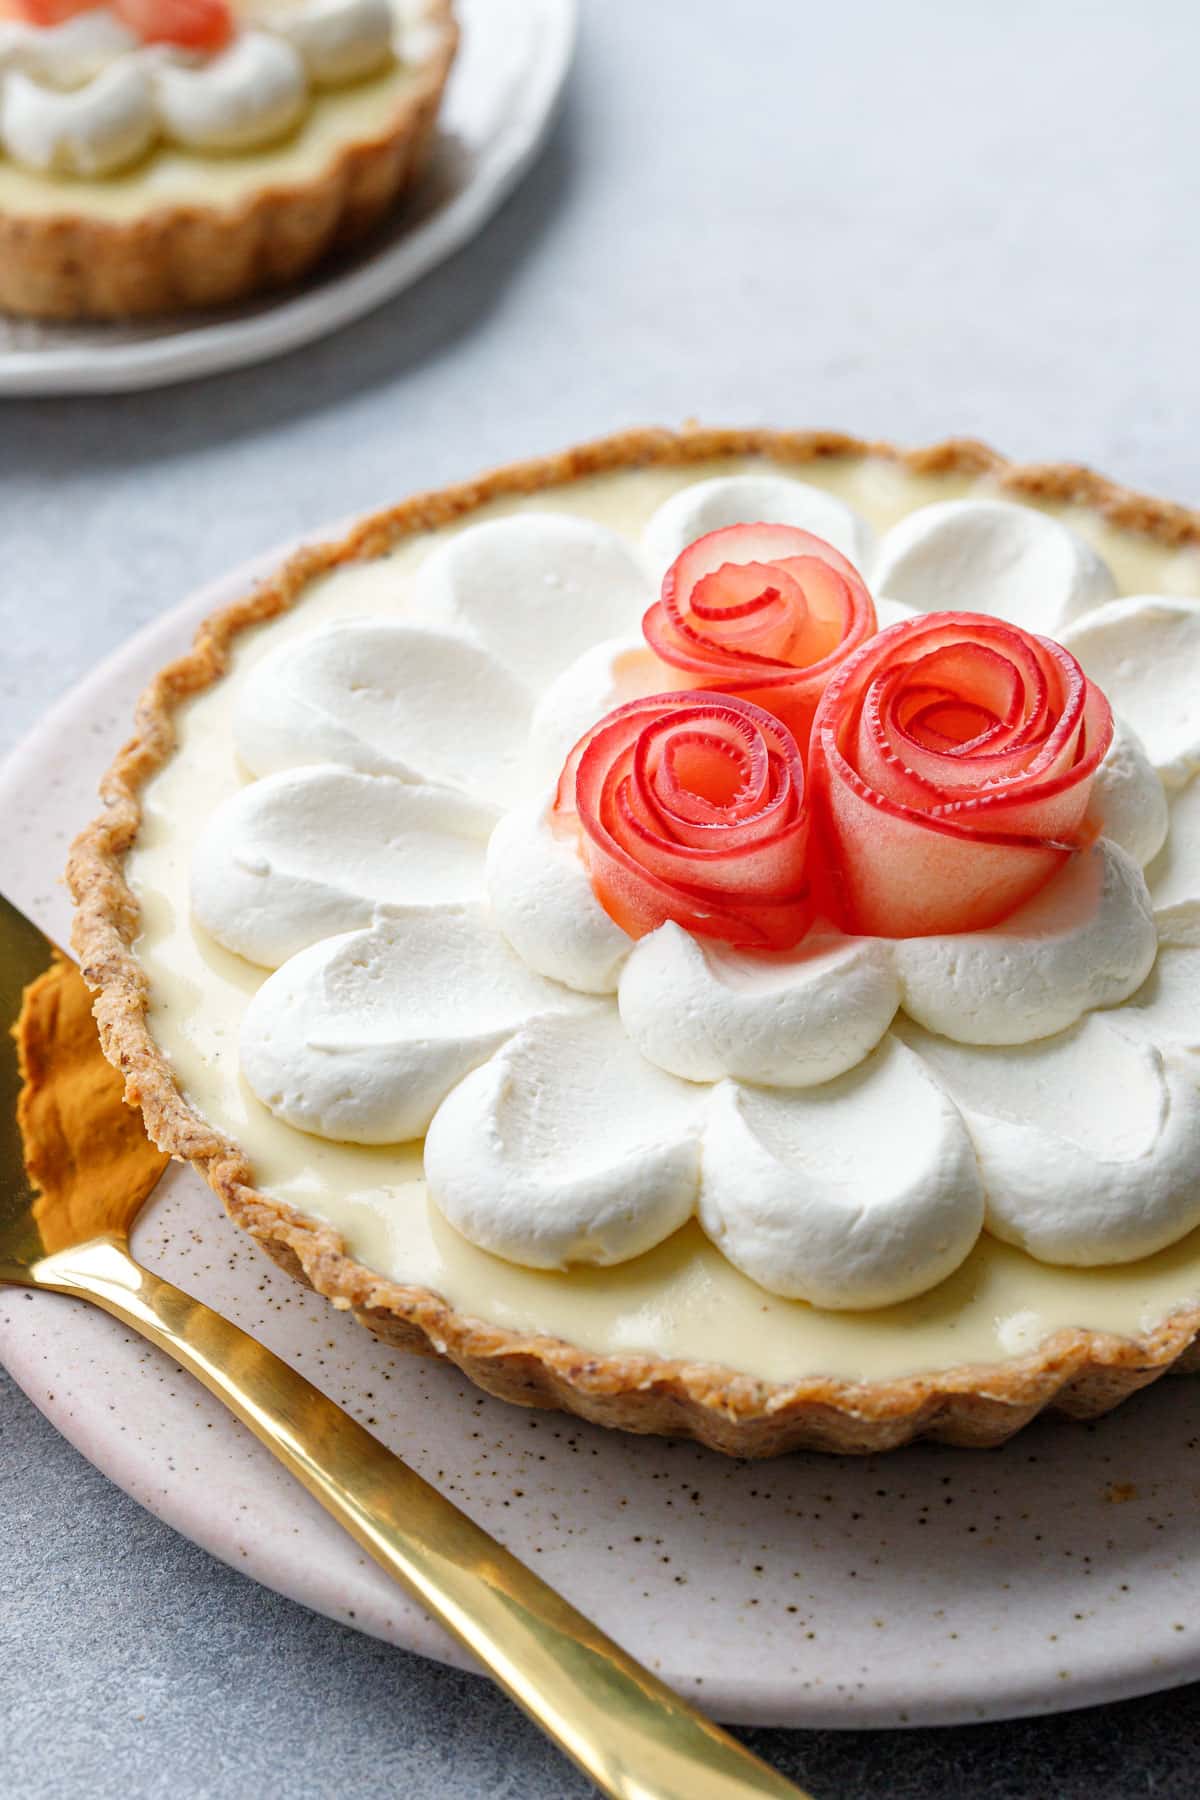 Closeup on decoration of a Caramel Apple Mousse Tart, a flower of piped whipped cream topped with three pink apple roses and a gold cake server on the side.